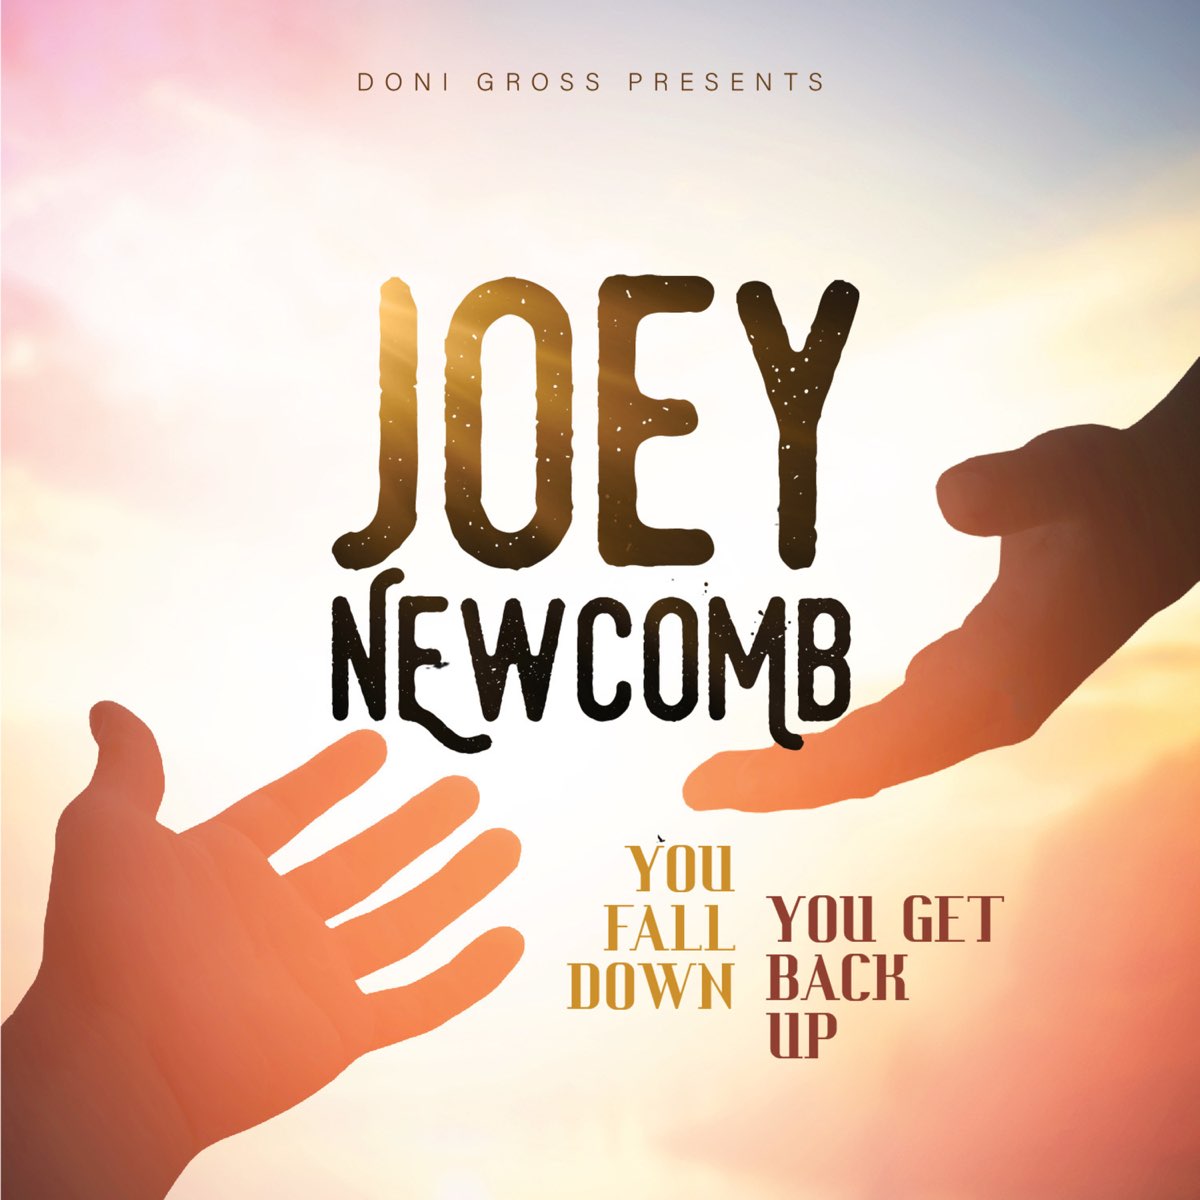 Joey newcomb thank you hashem